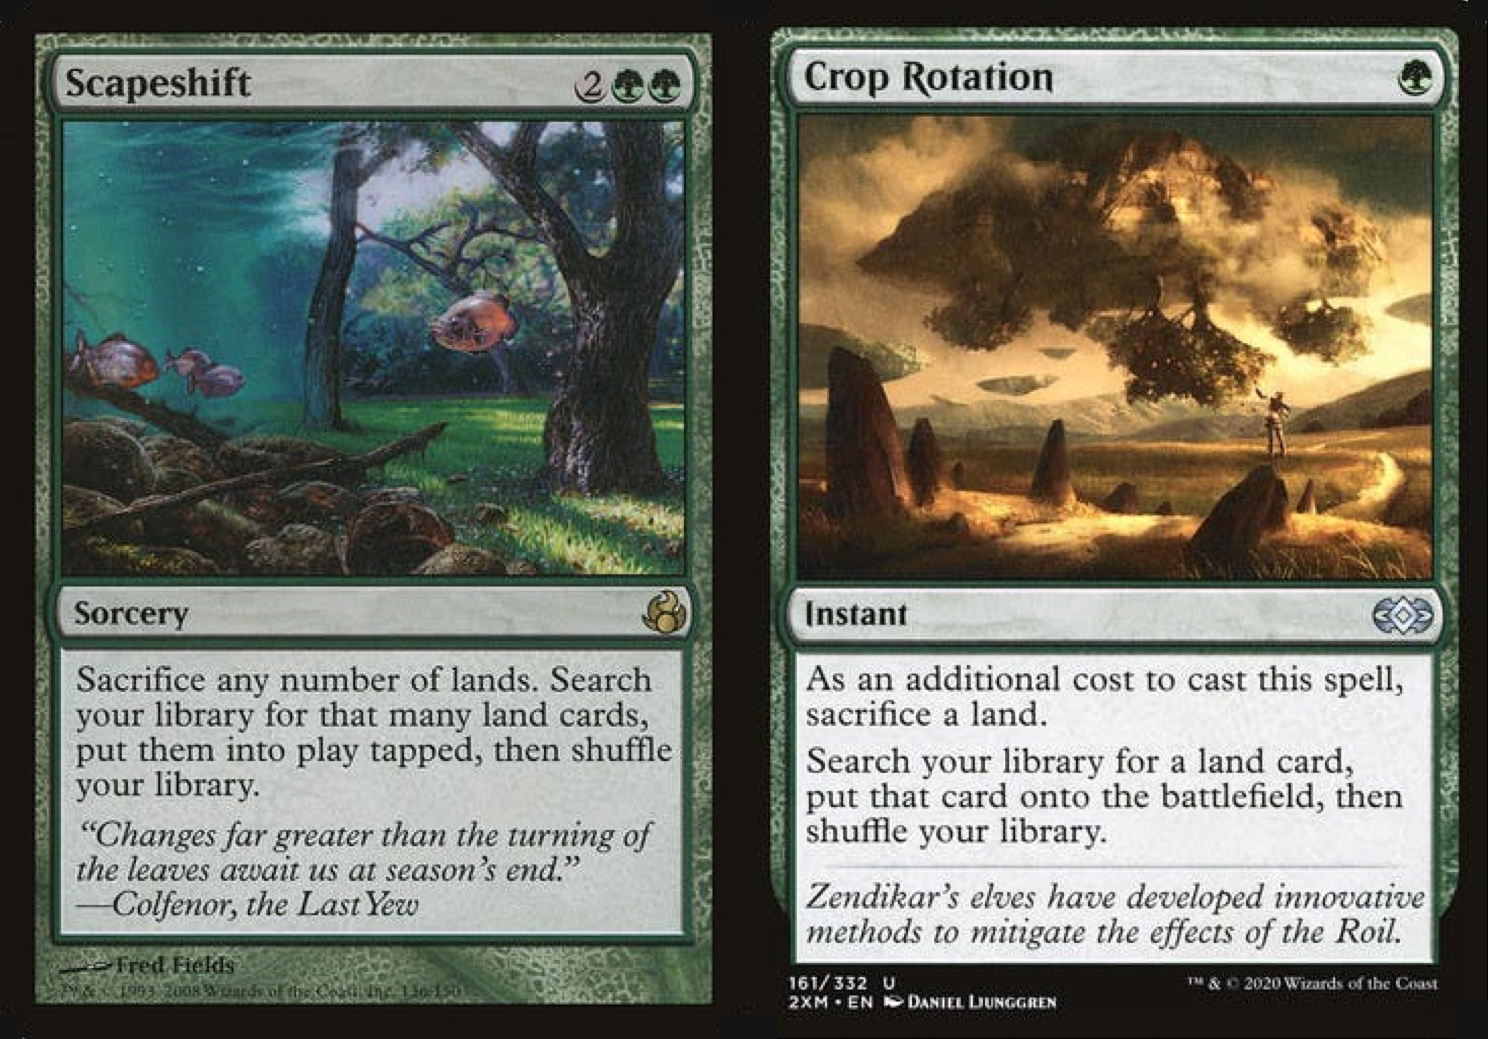 Scapeshift and Crop Rotation